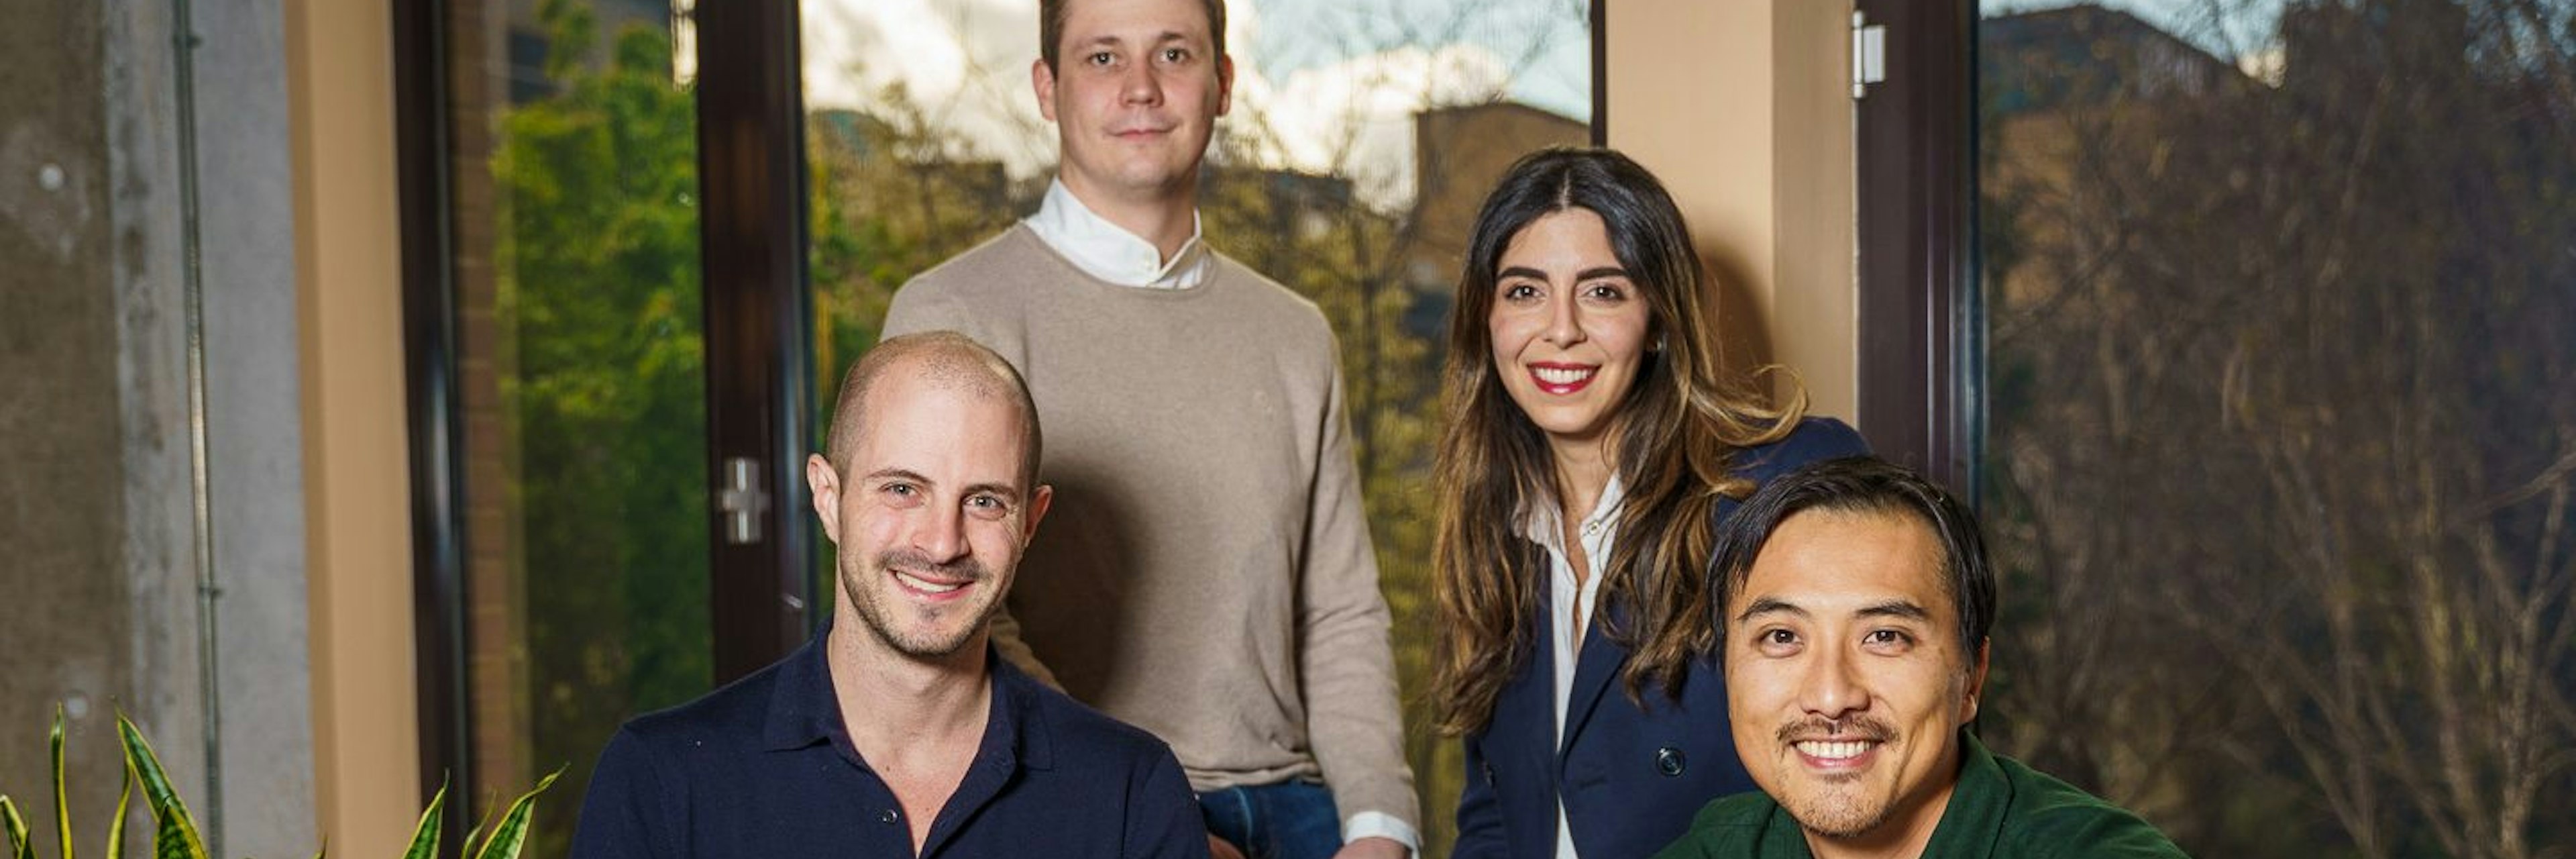 An image of the Outfund team, a revenue-based financing startup that has recently acquired smaller rival Clicfunds